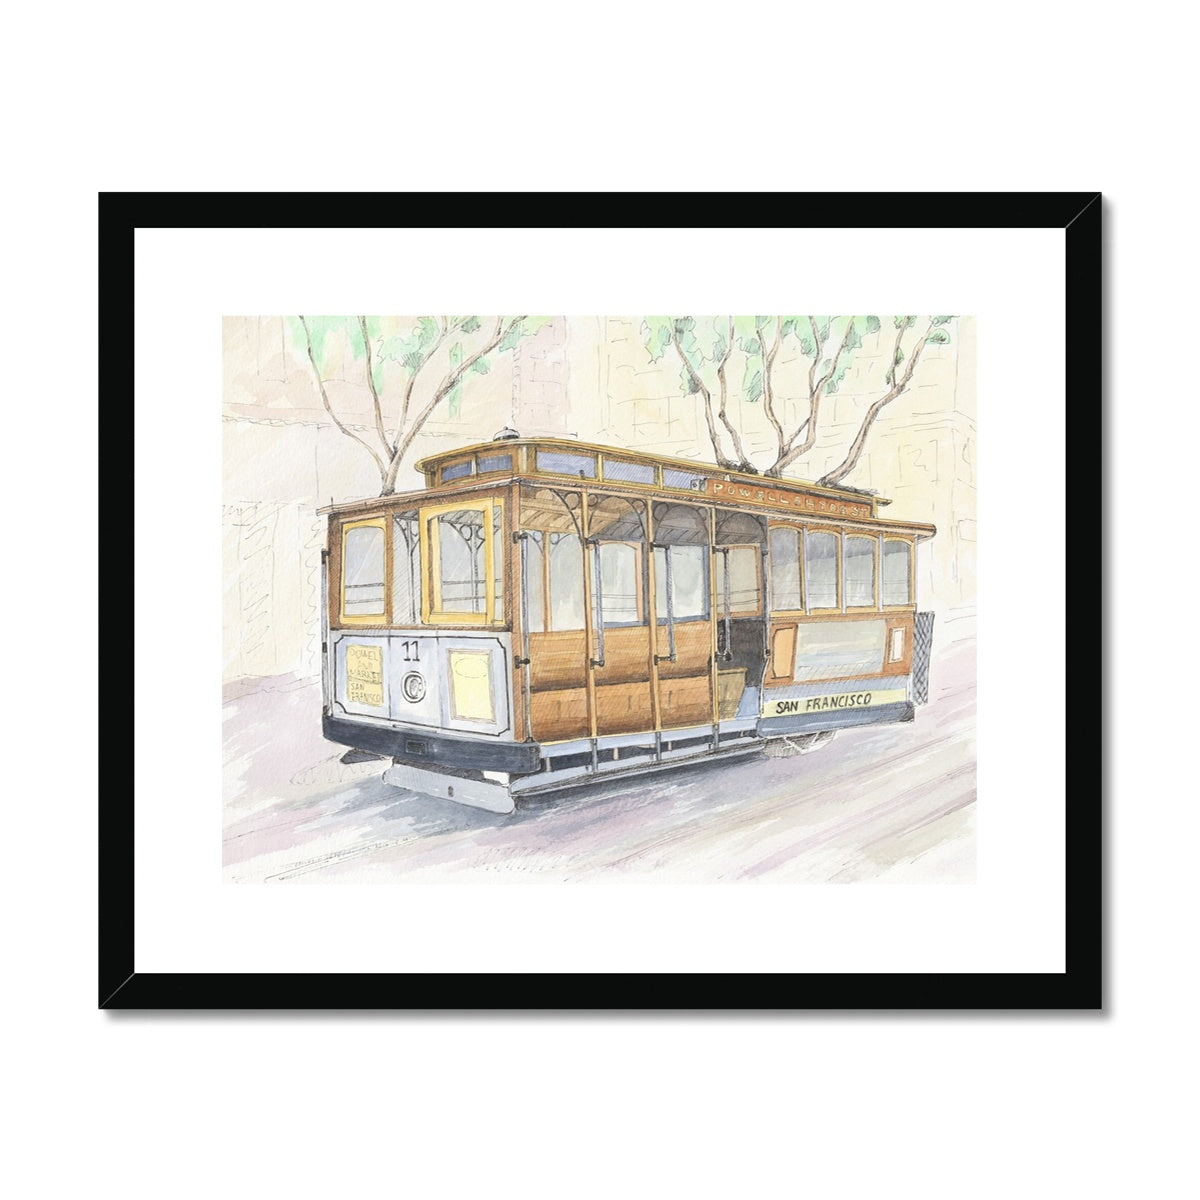 A cable car Framed & Mounted Print